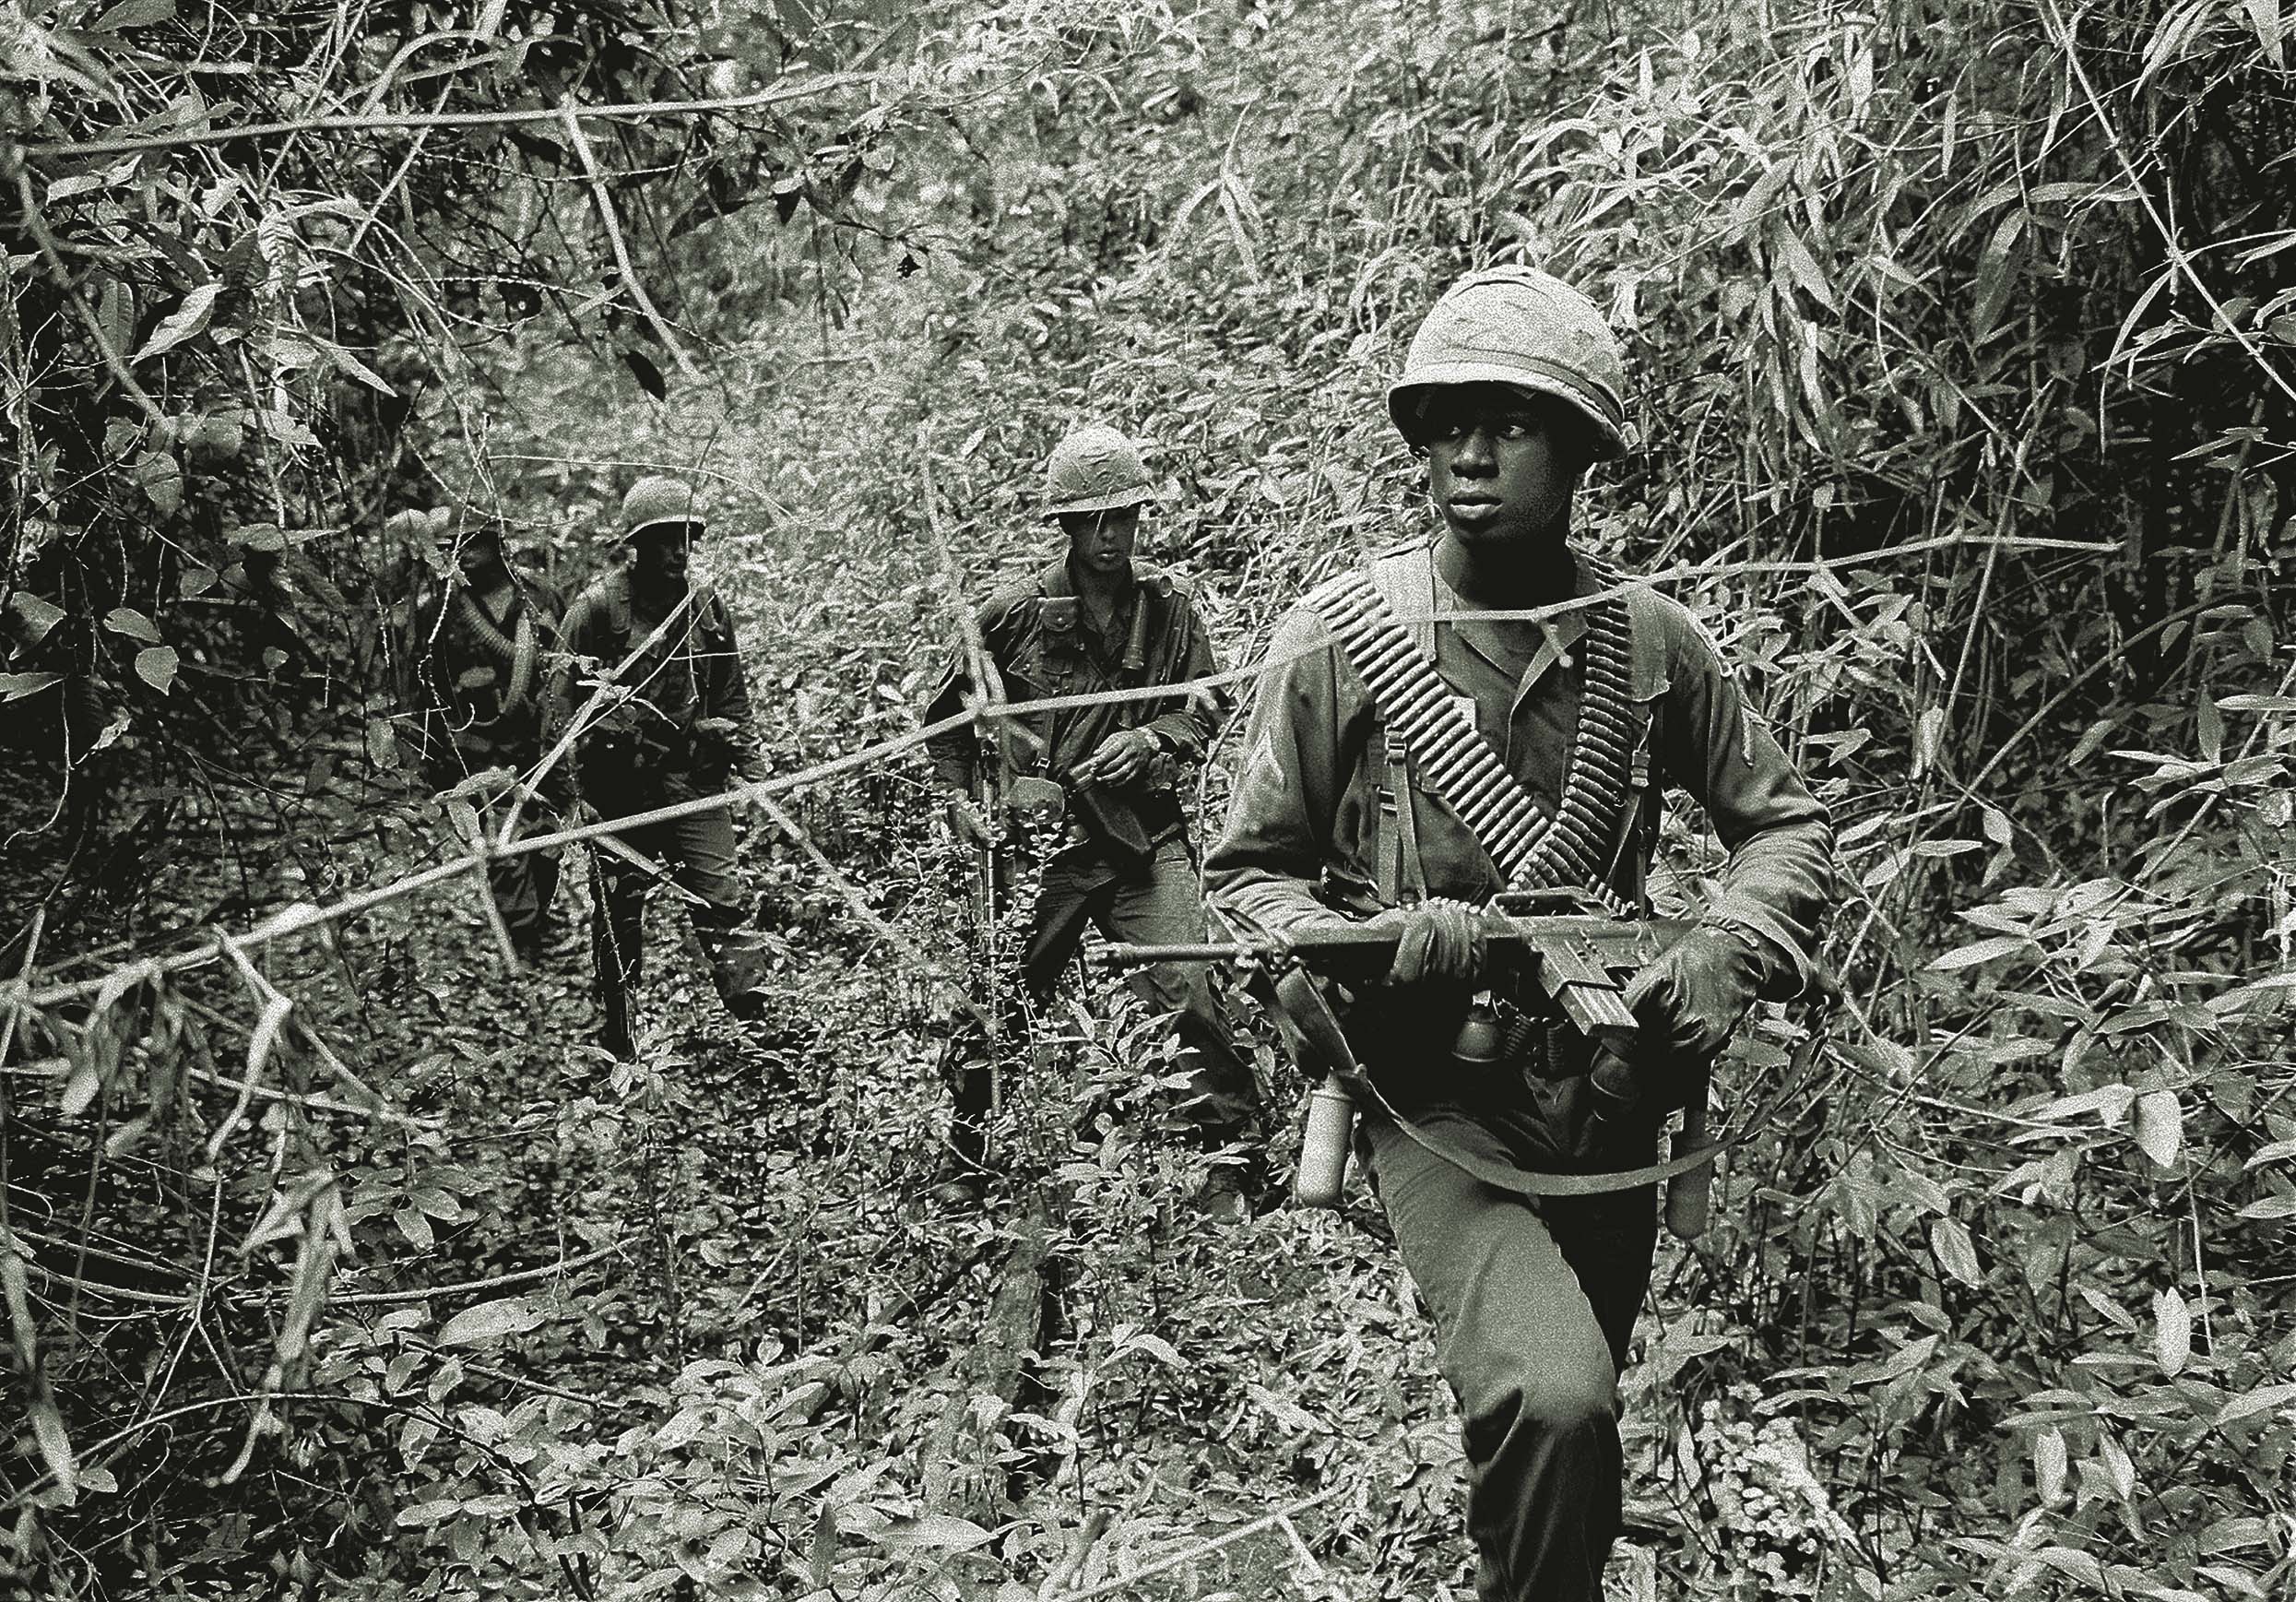 U.S. soldiers search for Viet Cong in a swampy jungle creek bed, June 1965, about 40 miles northeast of Saigon. Point men knew they were positioned to be among the first killed. / AP 